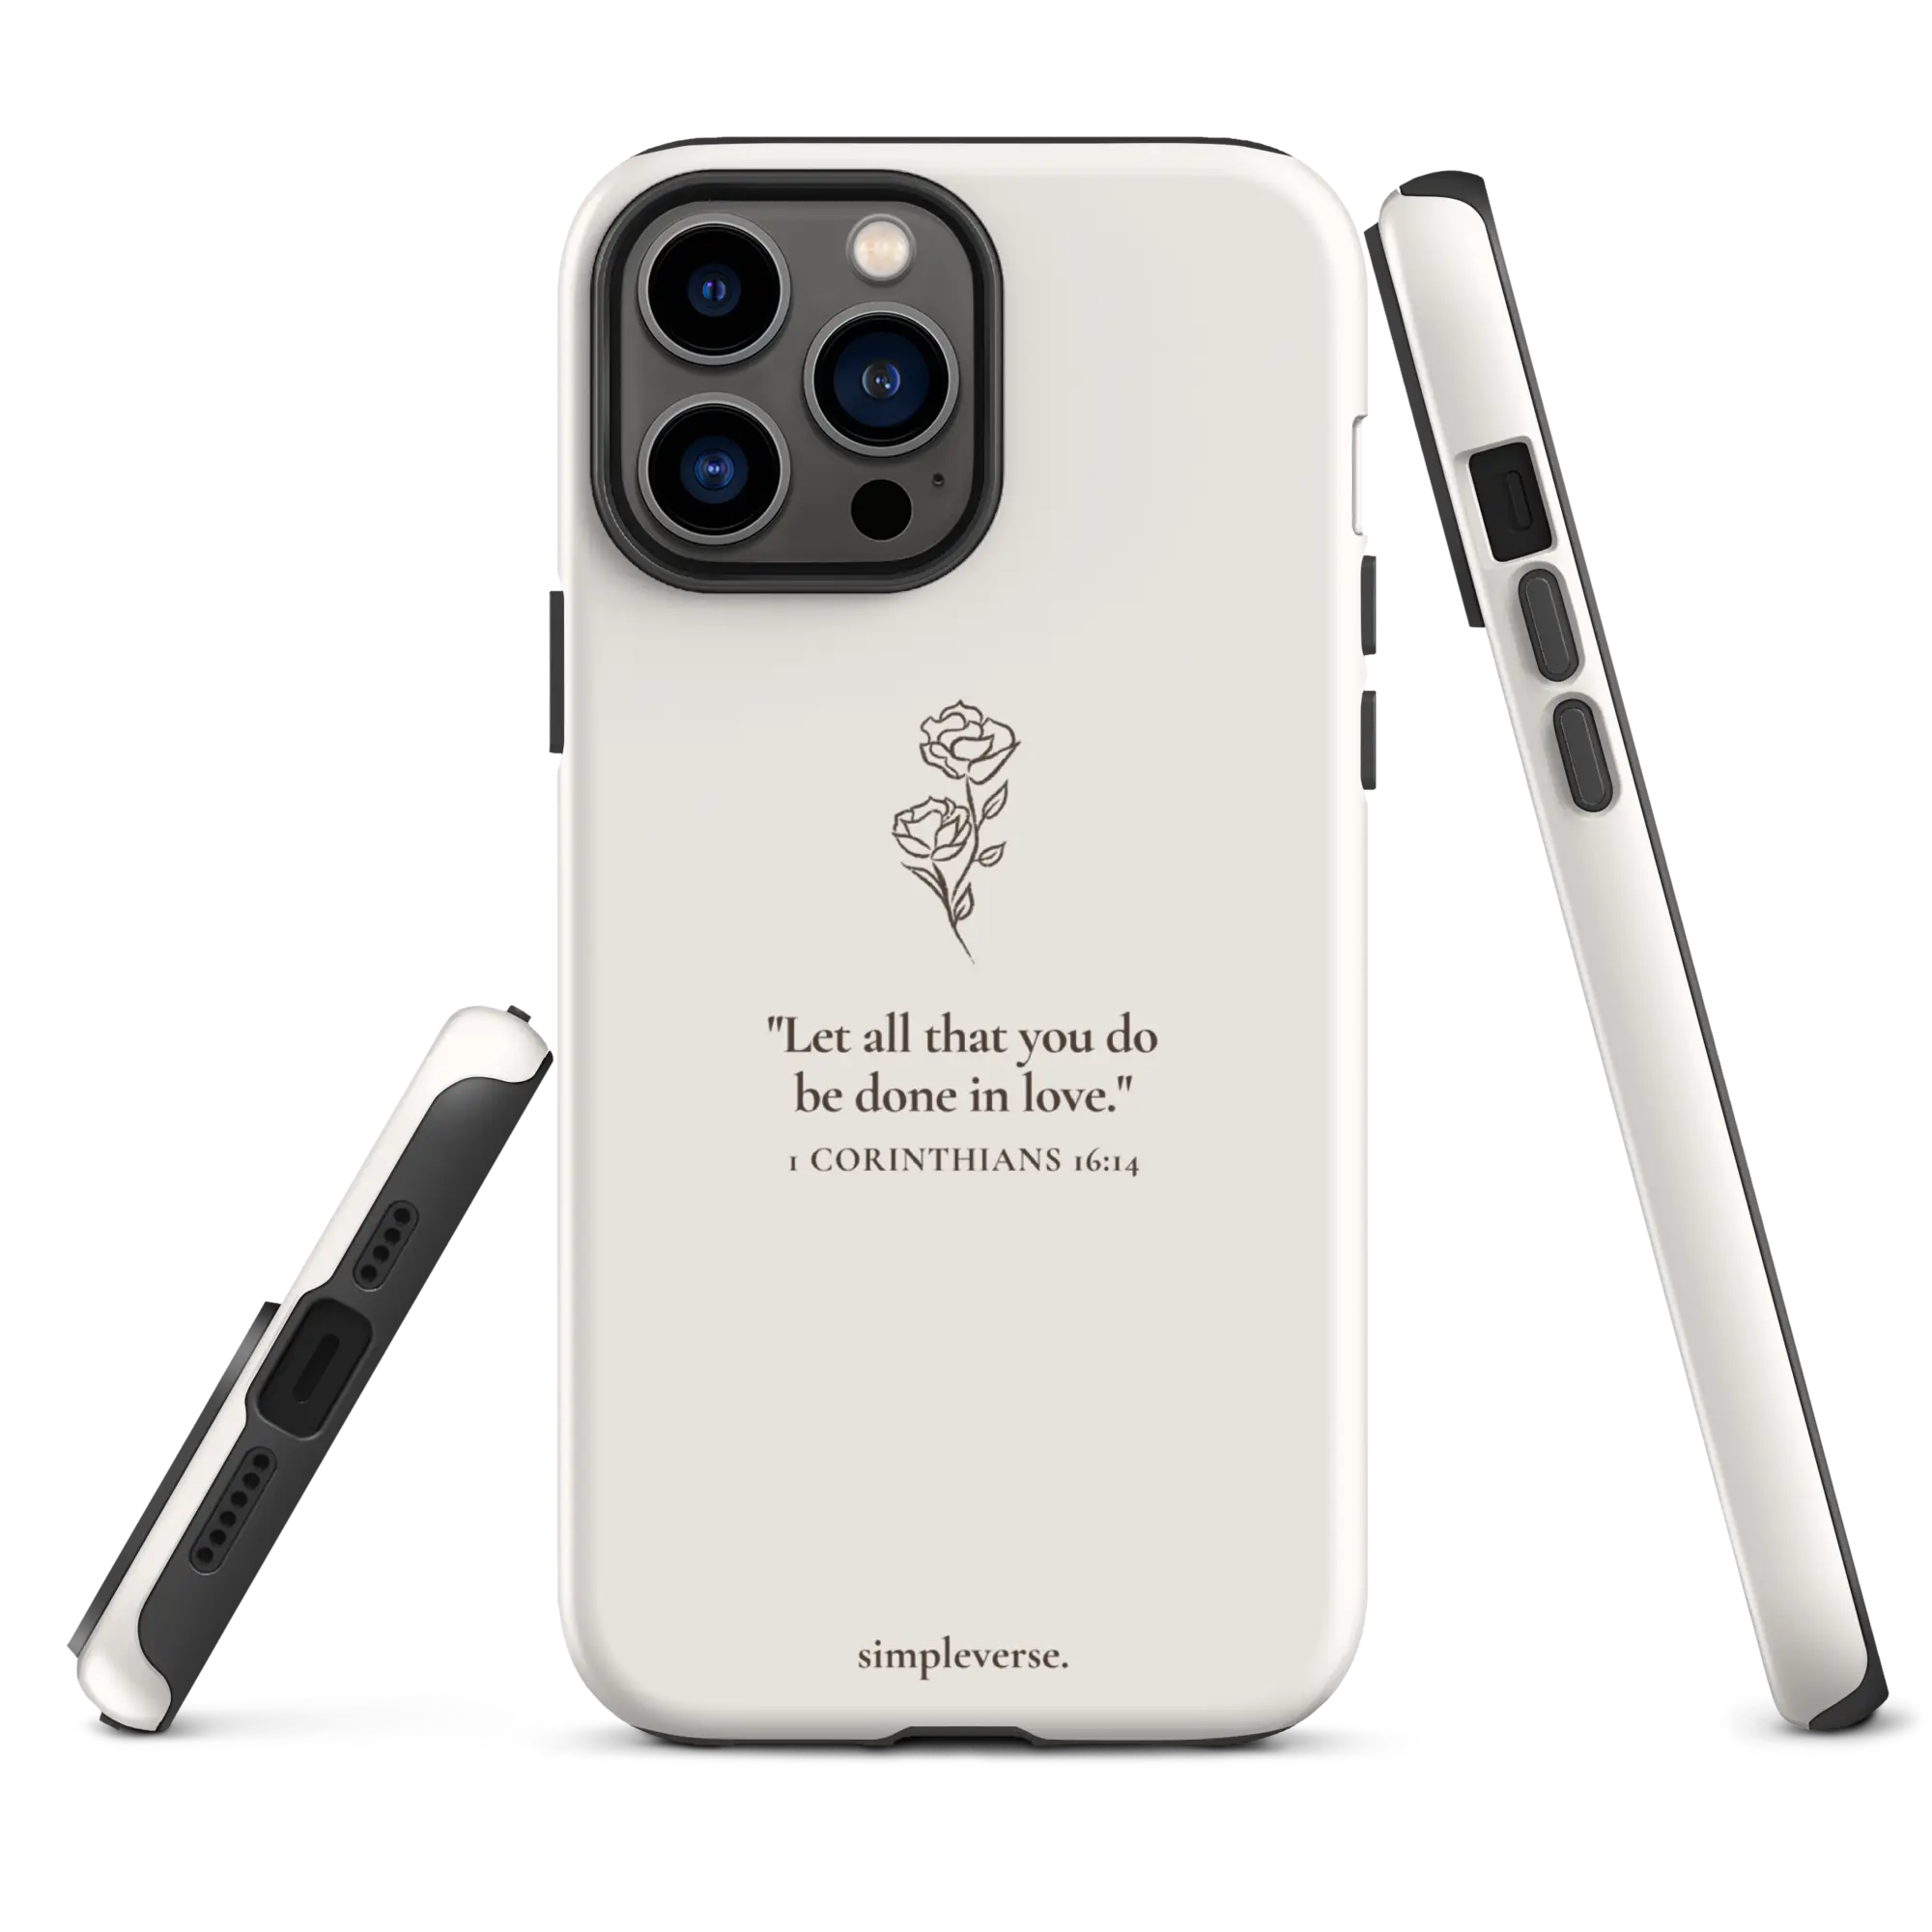 Elegant iPhone case with a rose illustration and '1 Corinthians 16:14' verse, inspiring love in all actions.